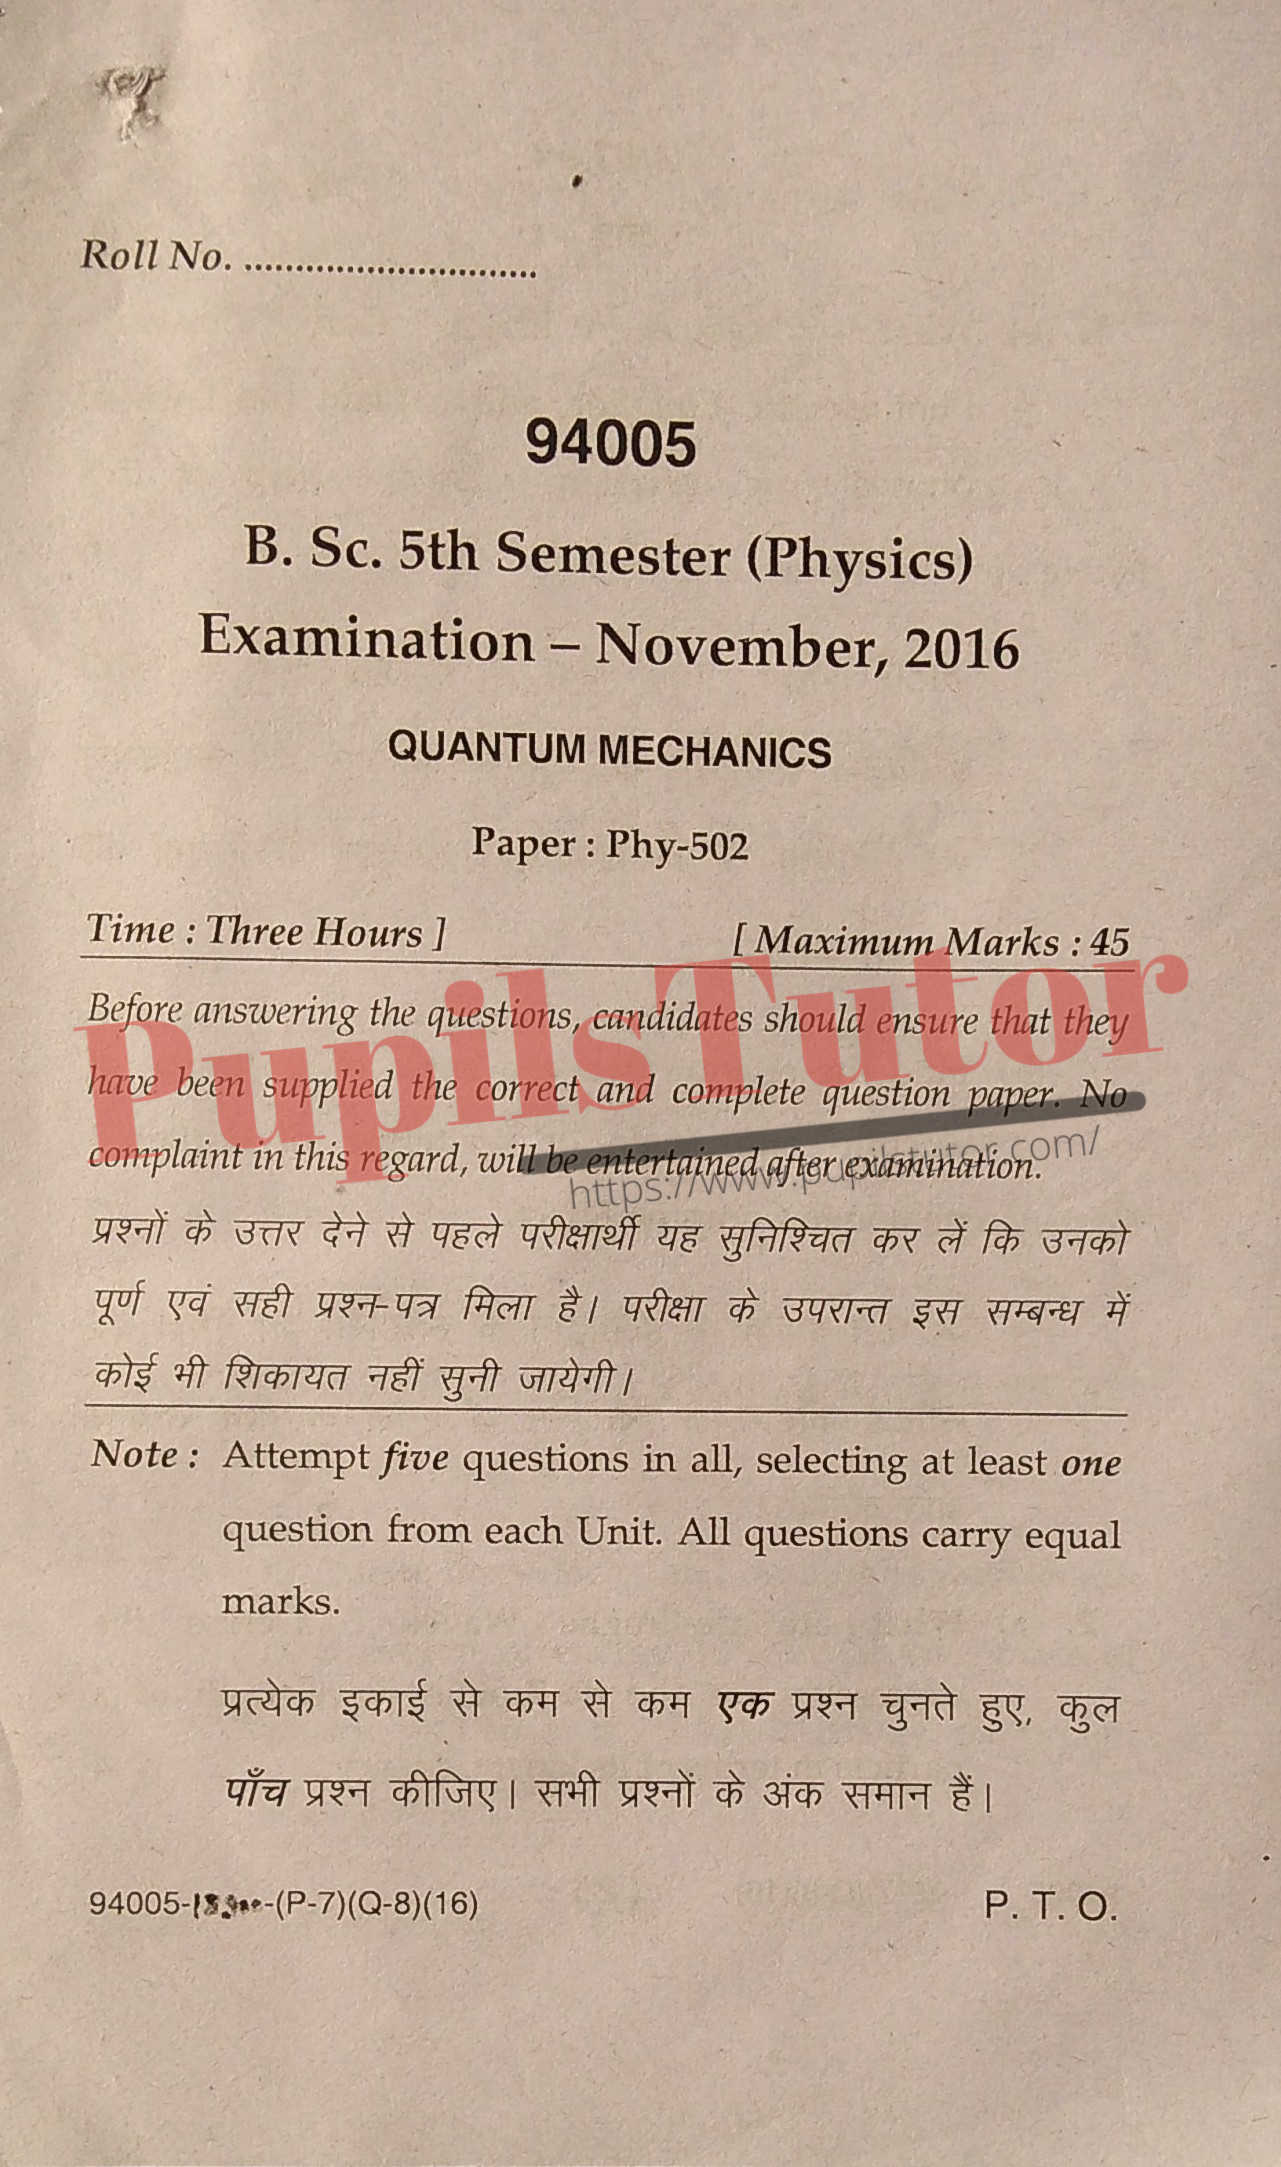 MDU (Maharshi Dayanand University, Rohtak Haryana) BSc Physics Pass And Honors 5th Semester Previous Year Quantum Mechanics Question Paper For November, 2016 Exam (Question Paper Page 1) - pupilstutor.com